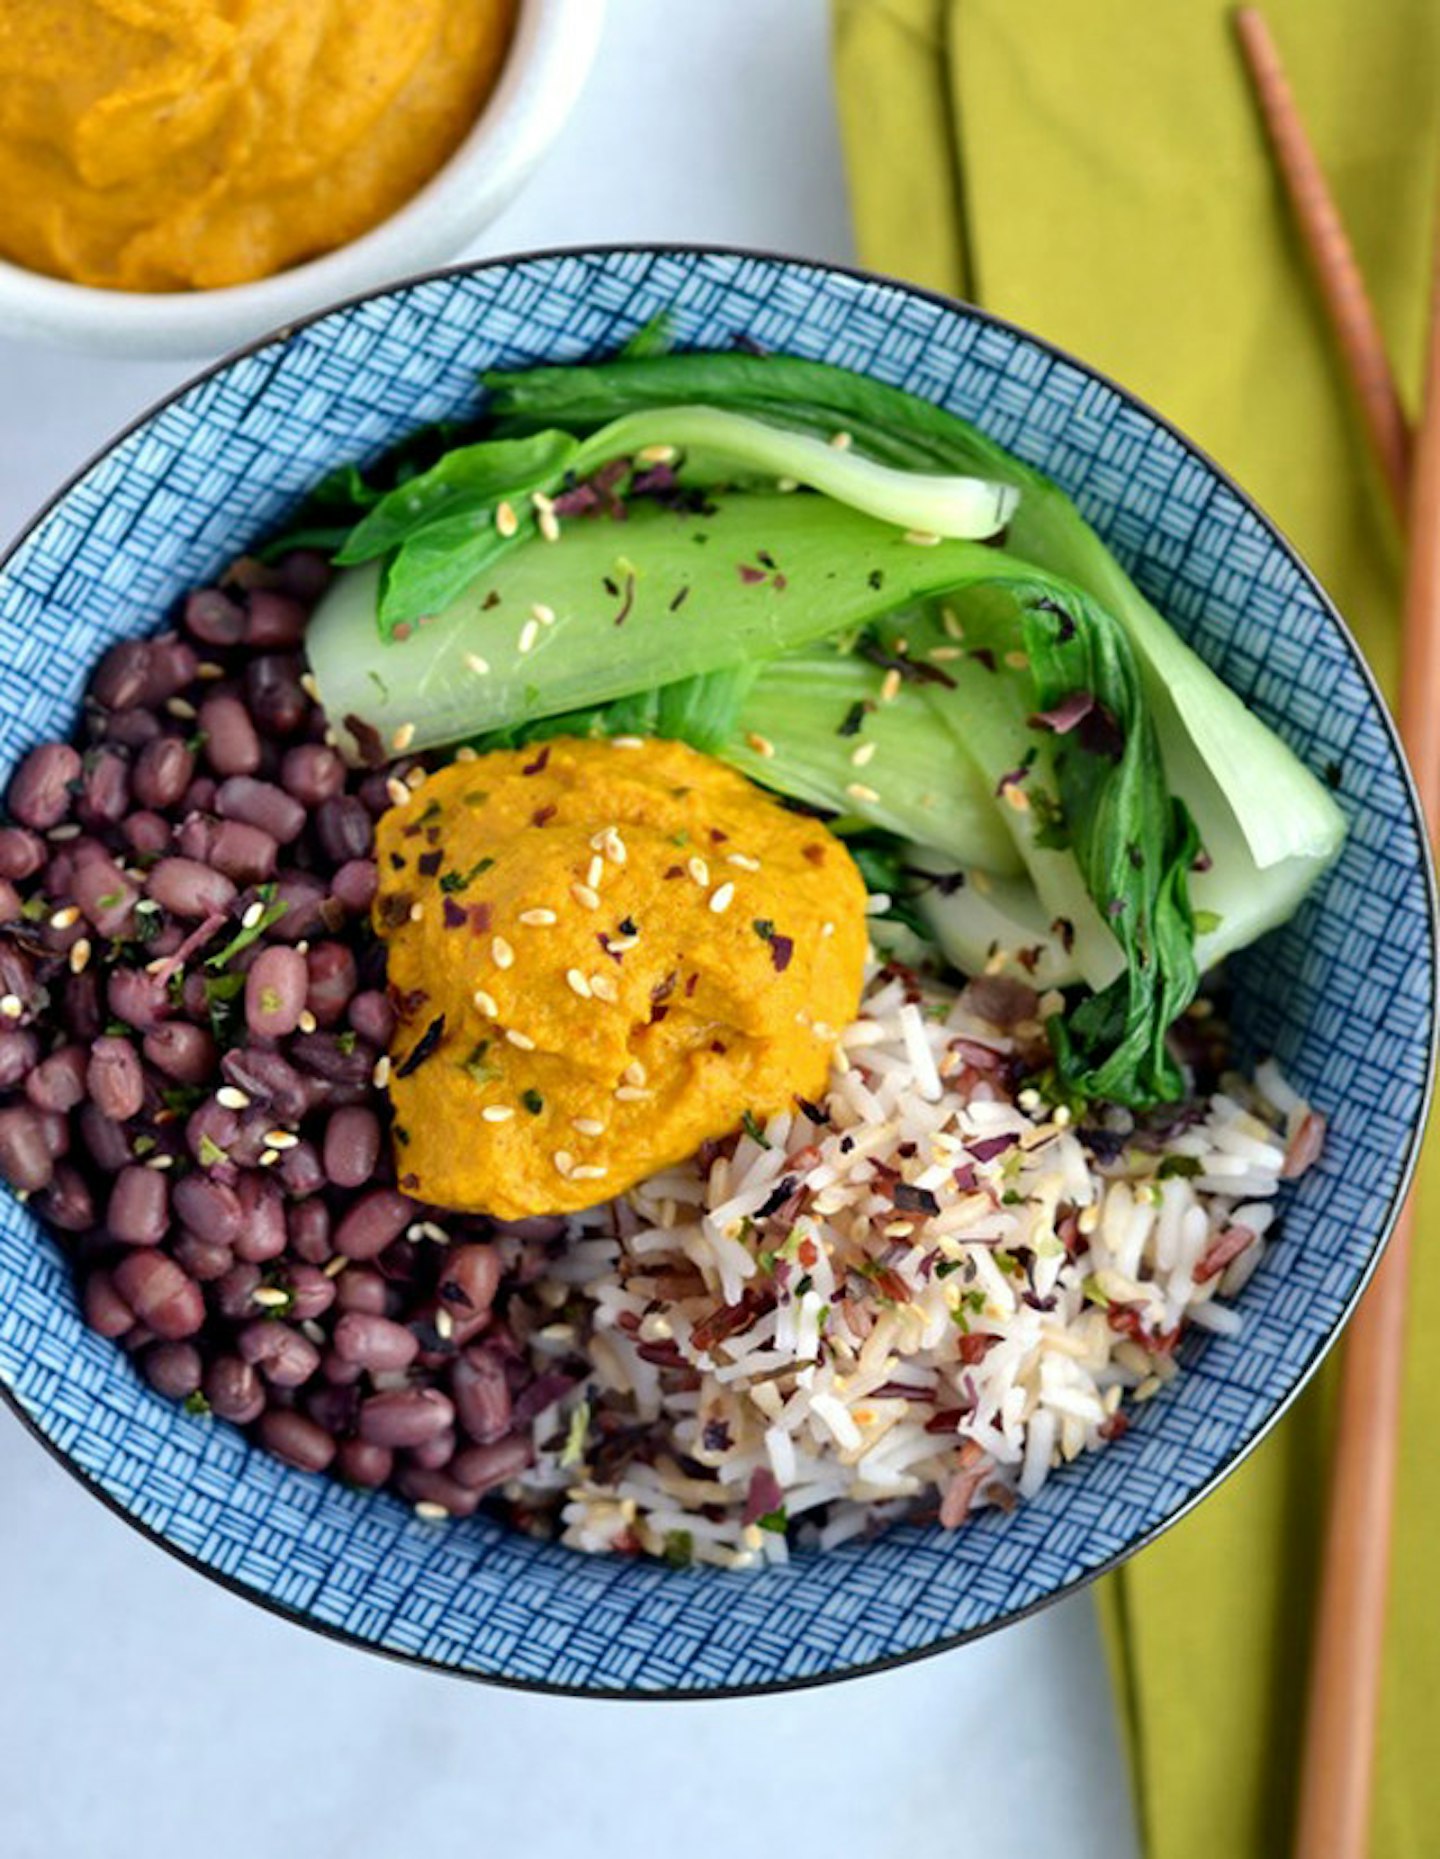 What Is A Buddha Bowl And How Do I Make One?